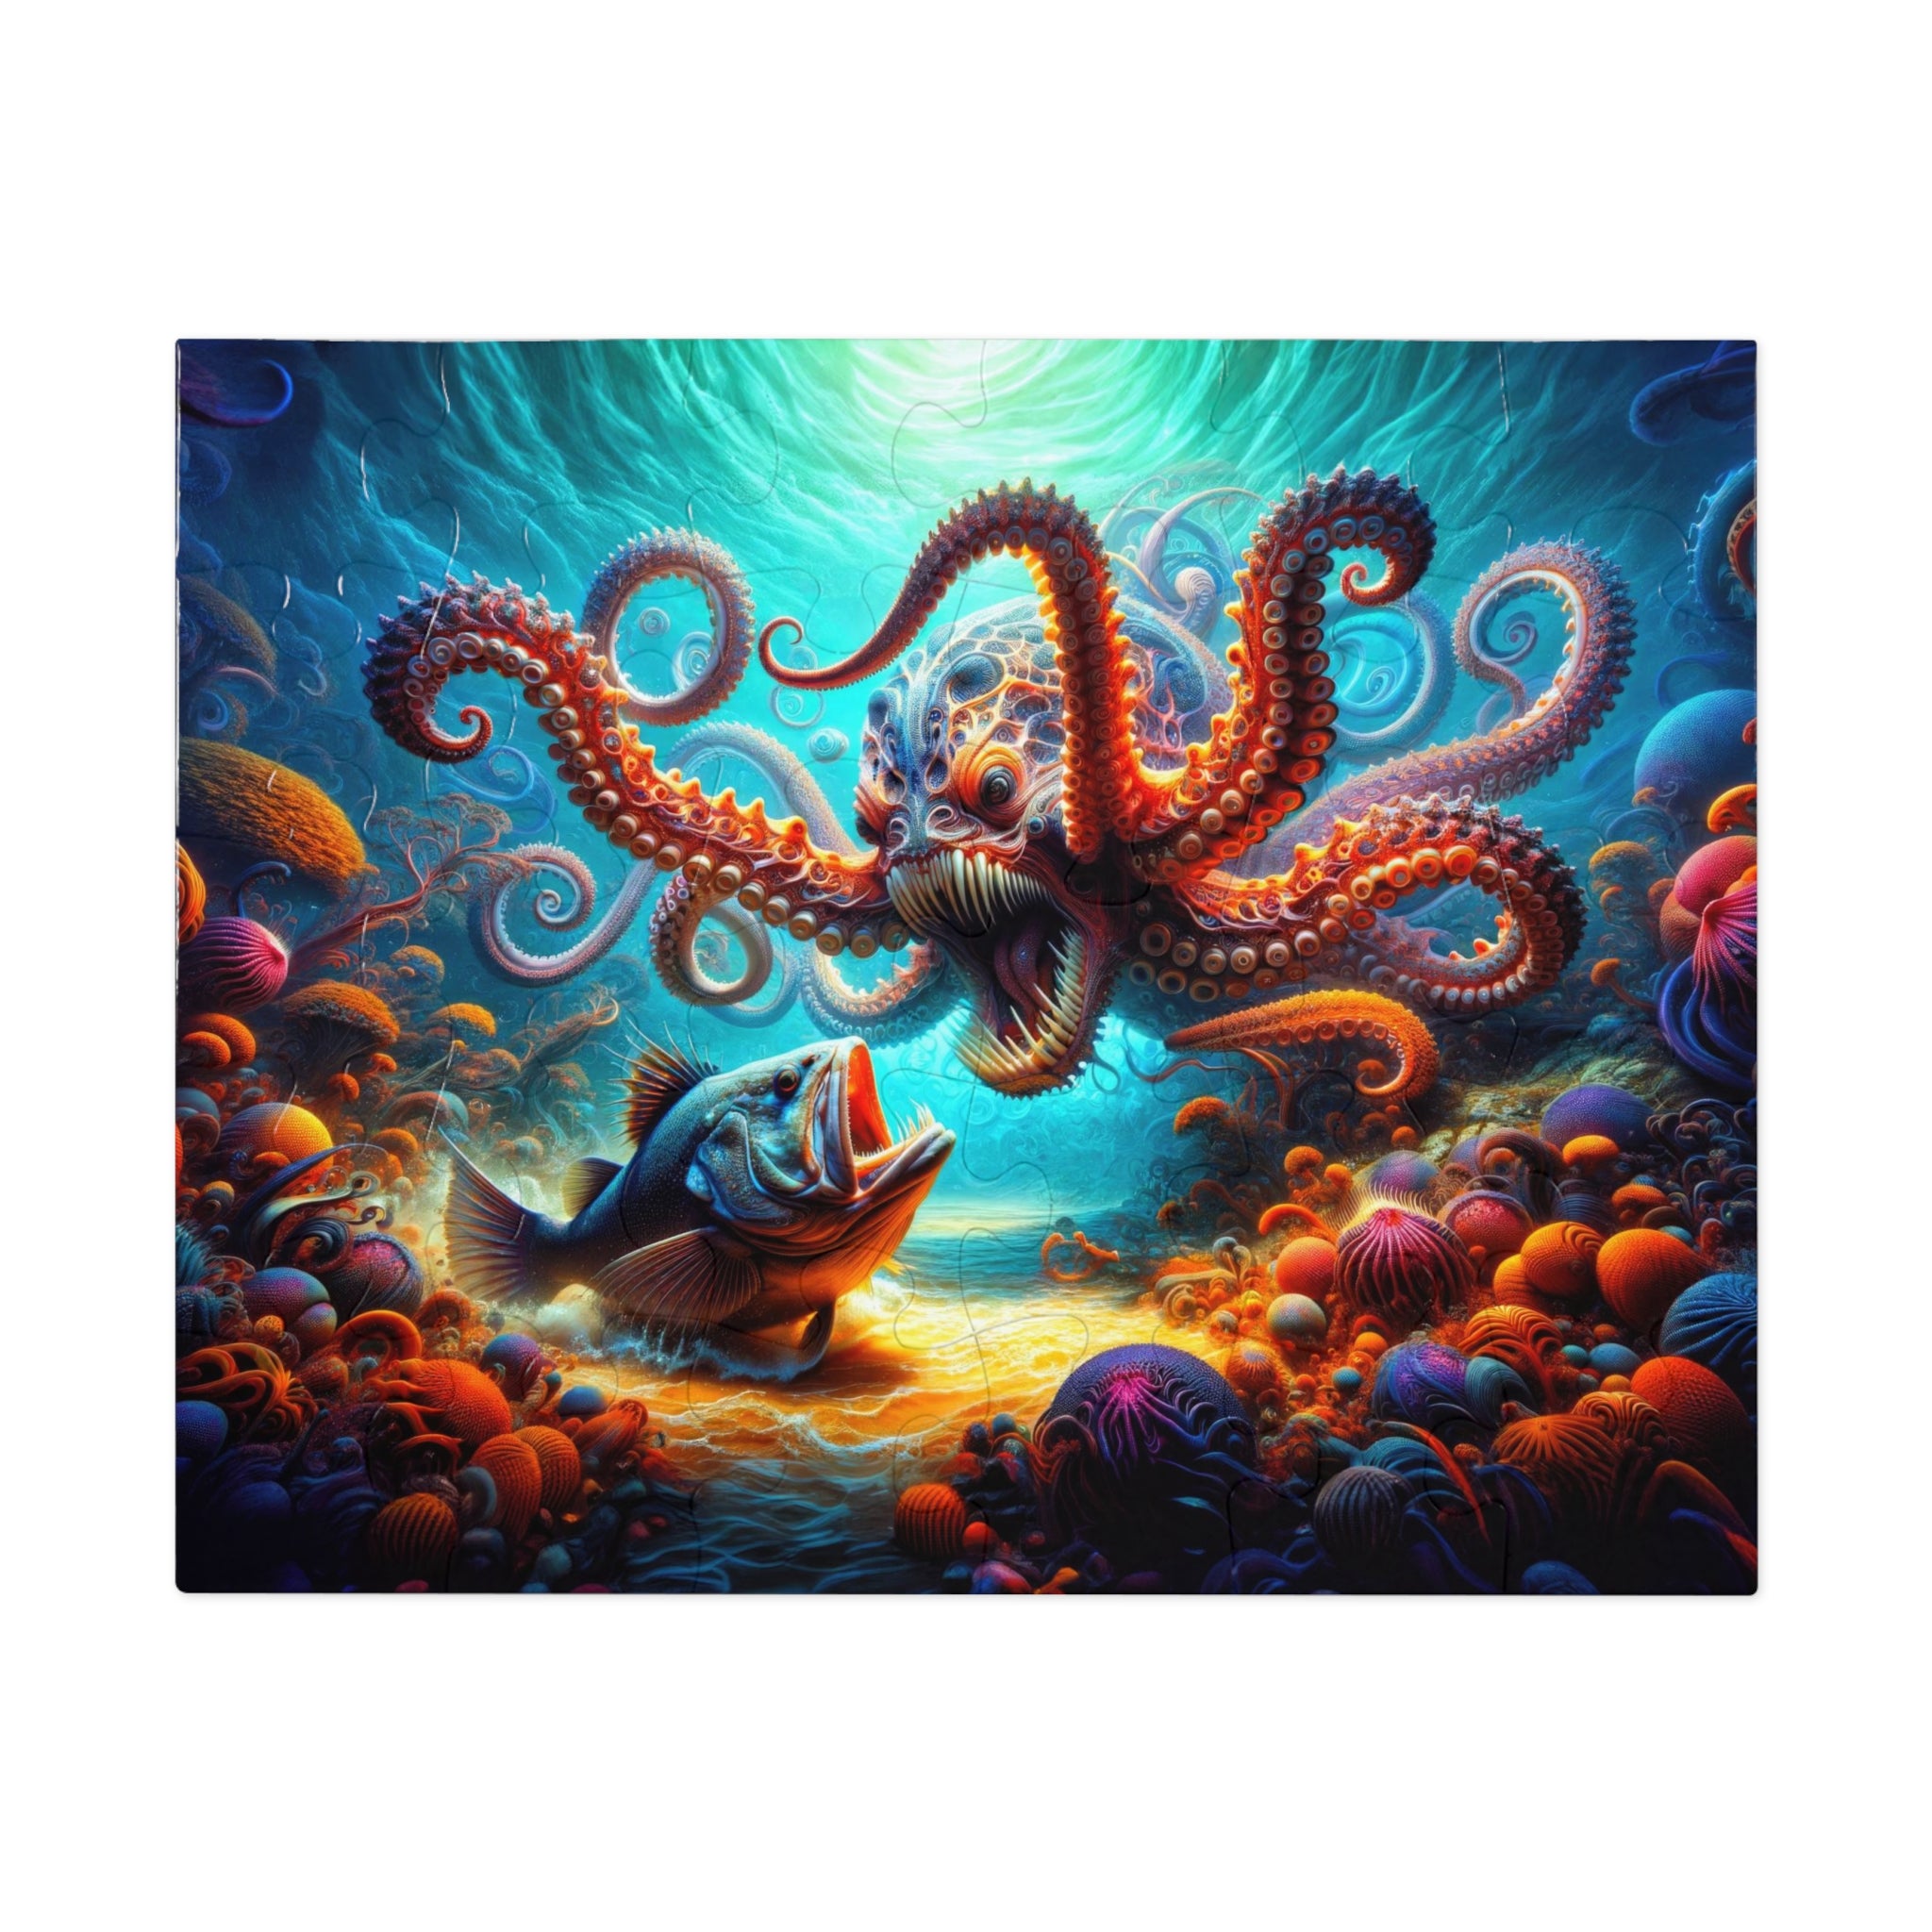 Abyssal Confrontation Jigsaw Puzzle